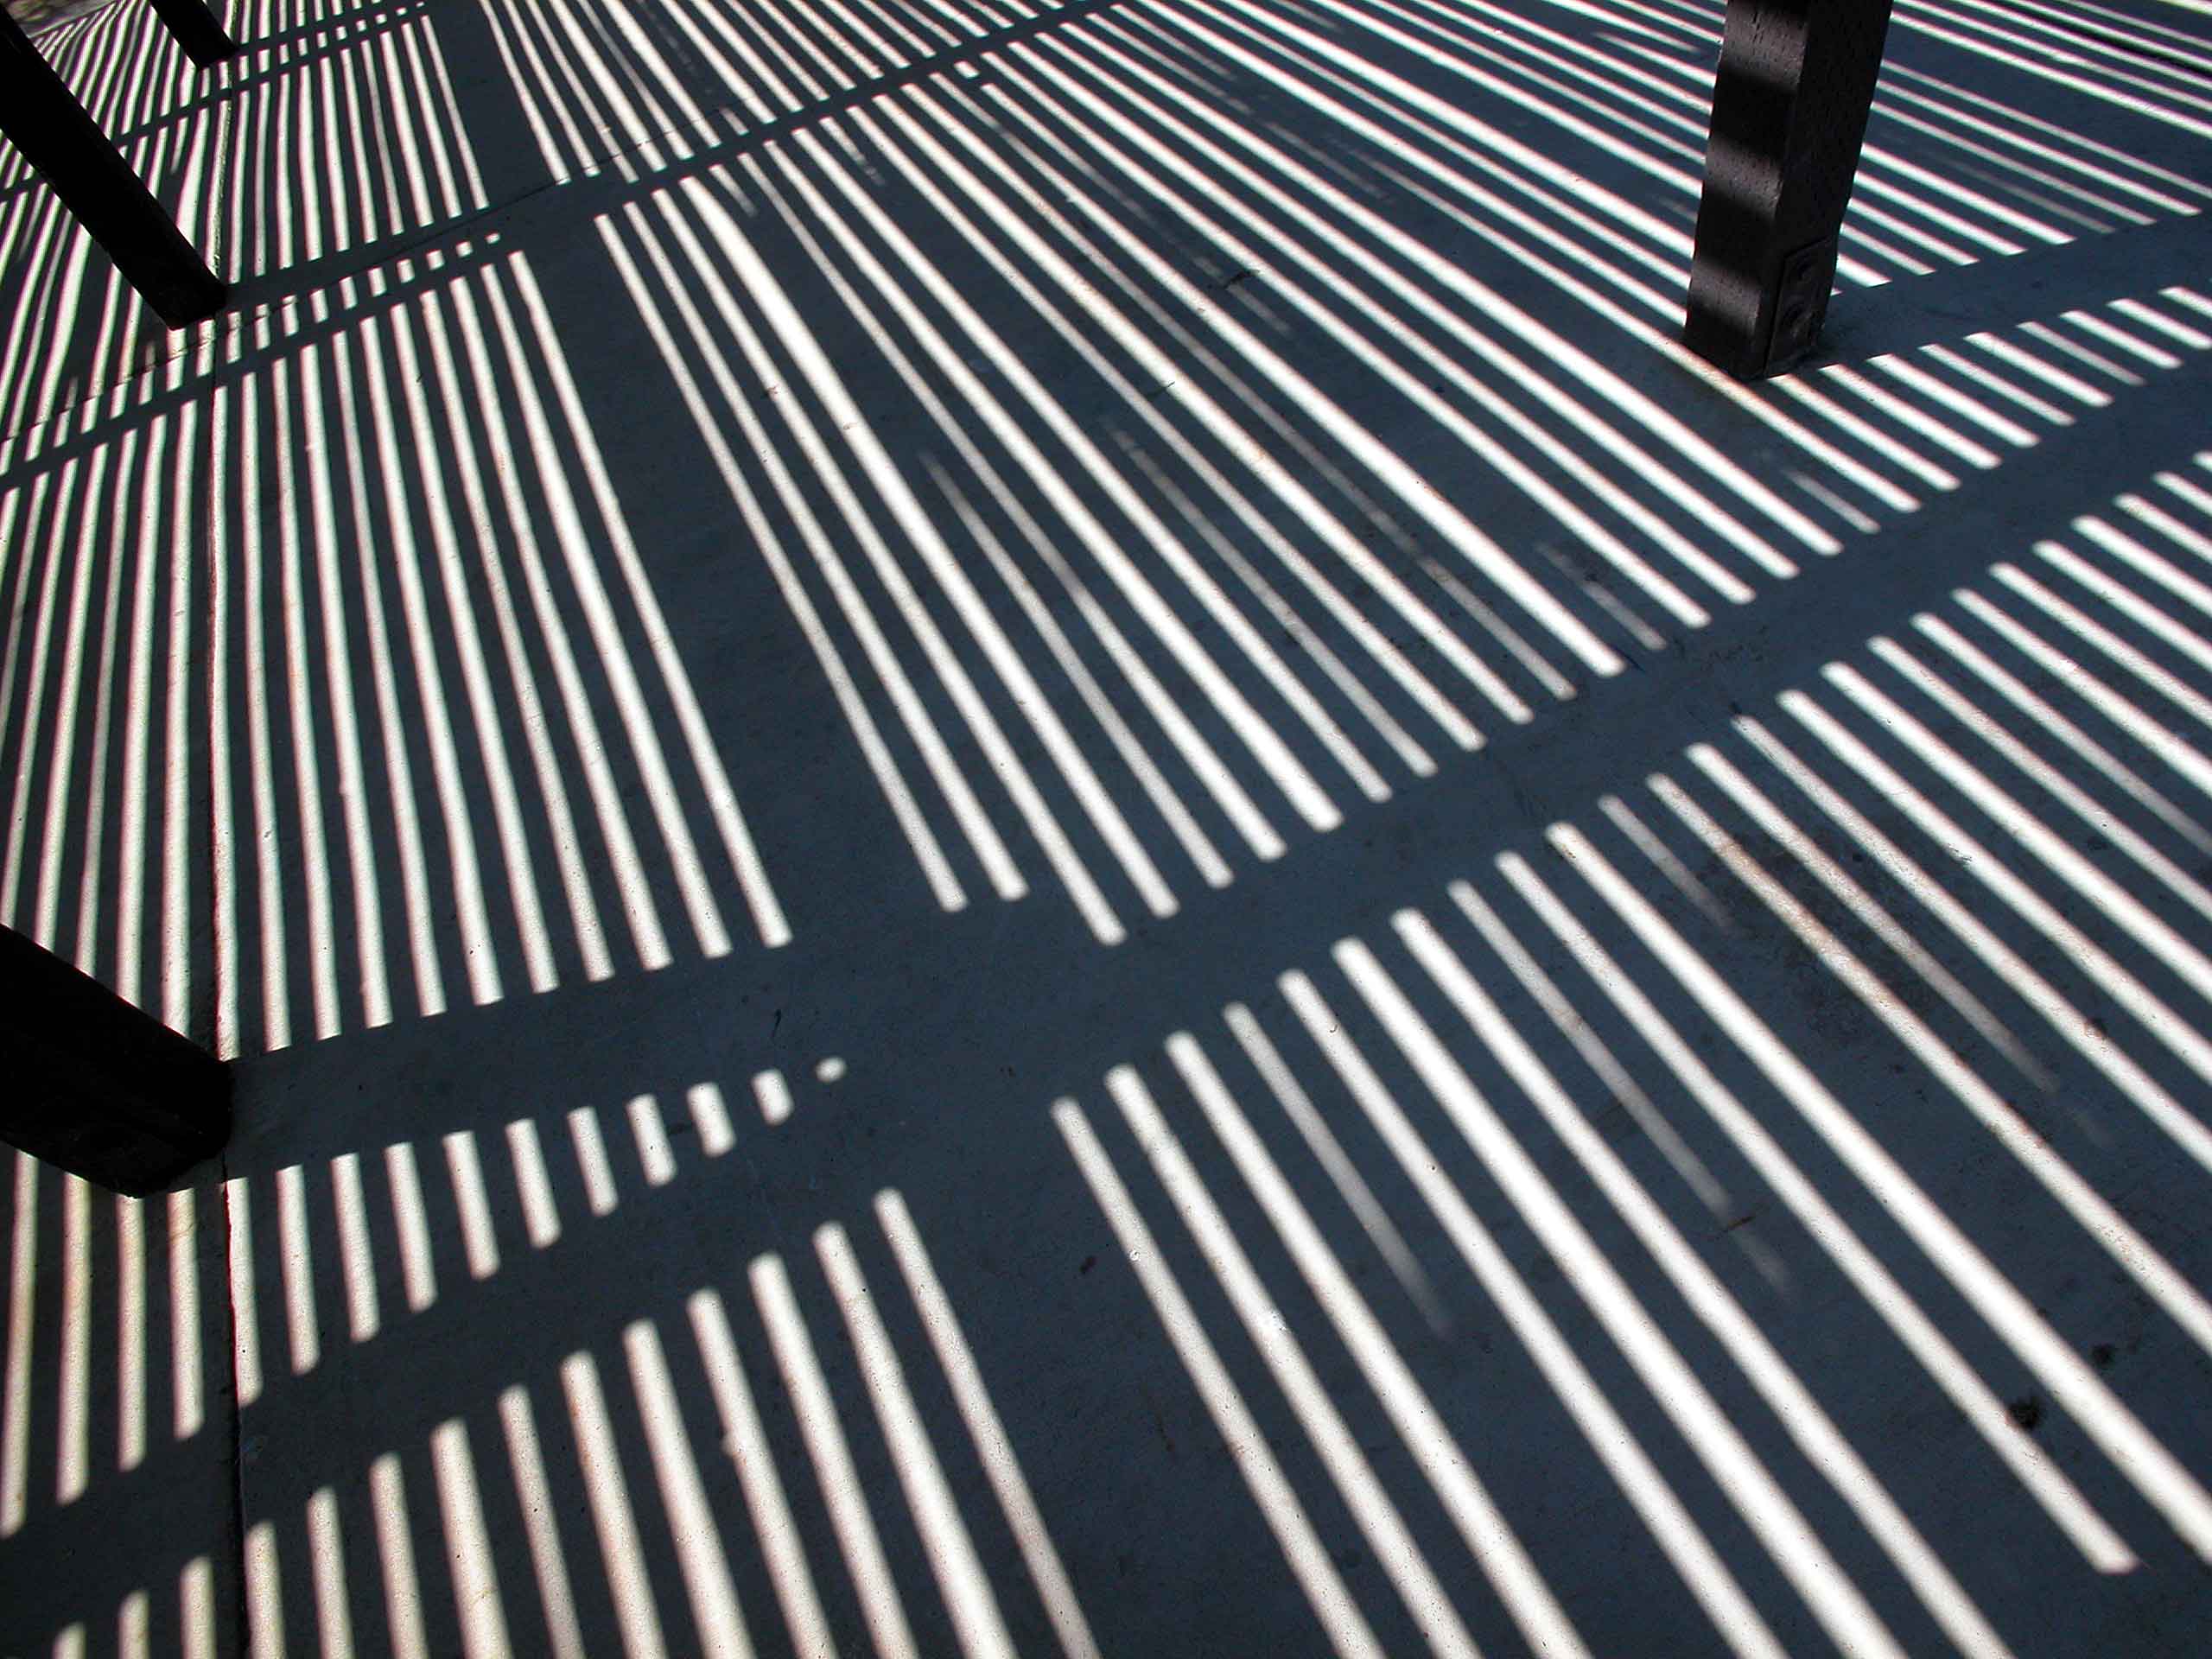 Abstract - shadows from a slatted open structure